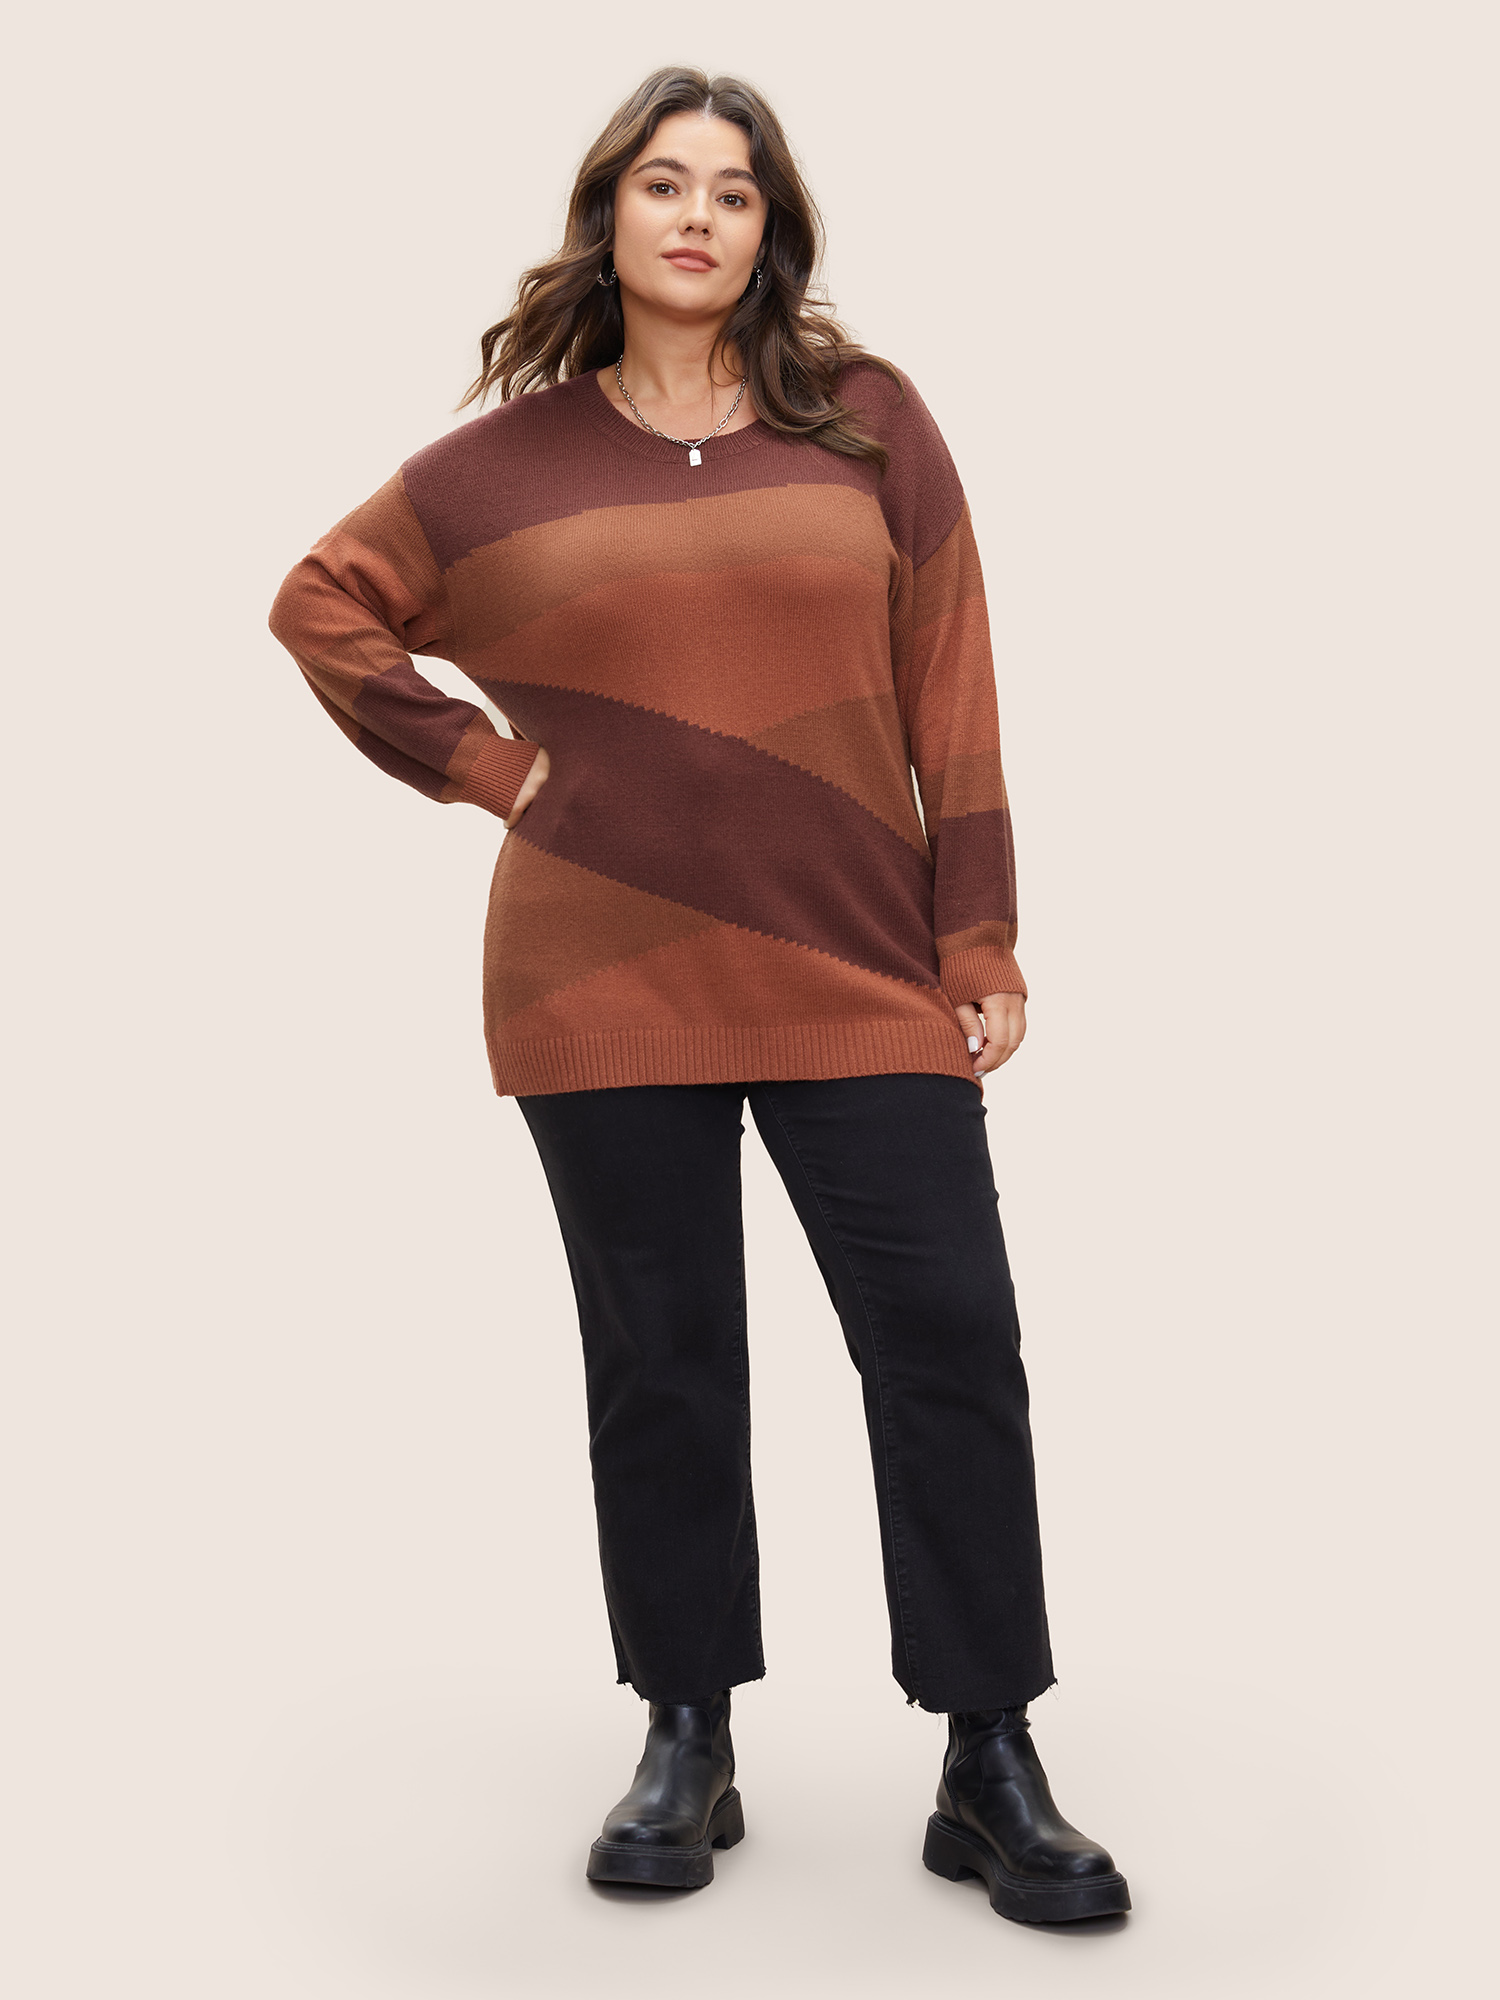 

Plus Size Supersoft Essentials Colorblock Contrast Drop Shoulder Pullover Rust Women Casual Long Sleeve Round Neck Everyday Pullovers BloomChic